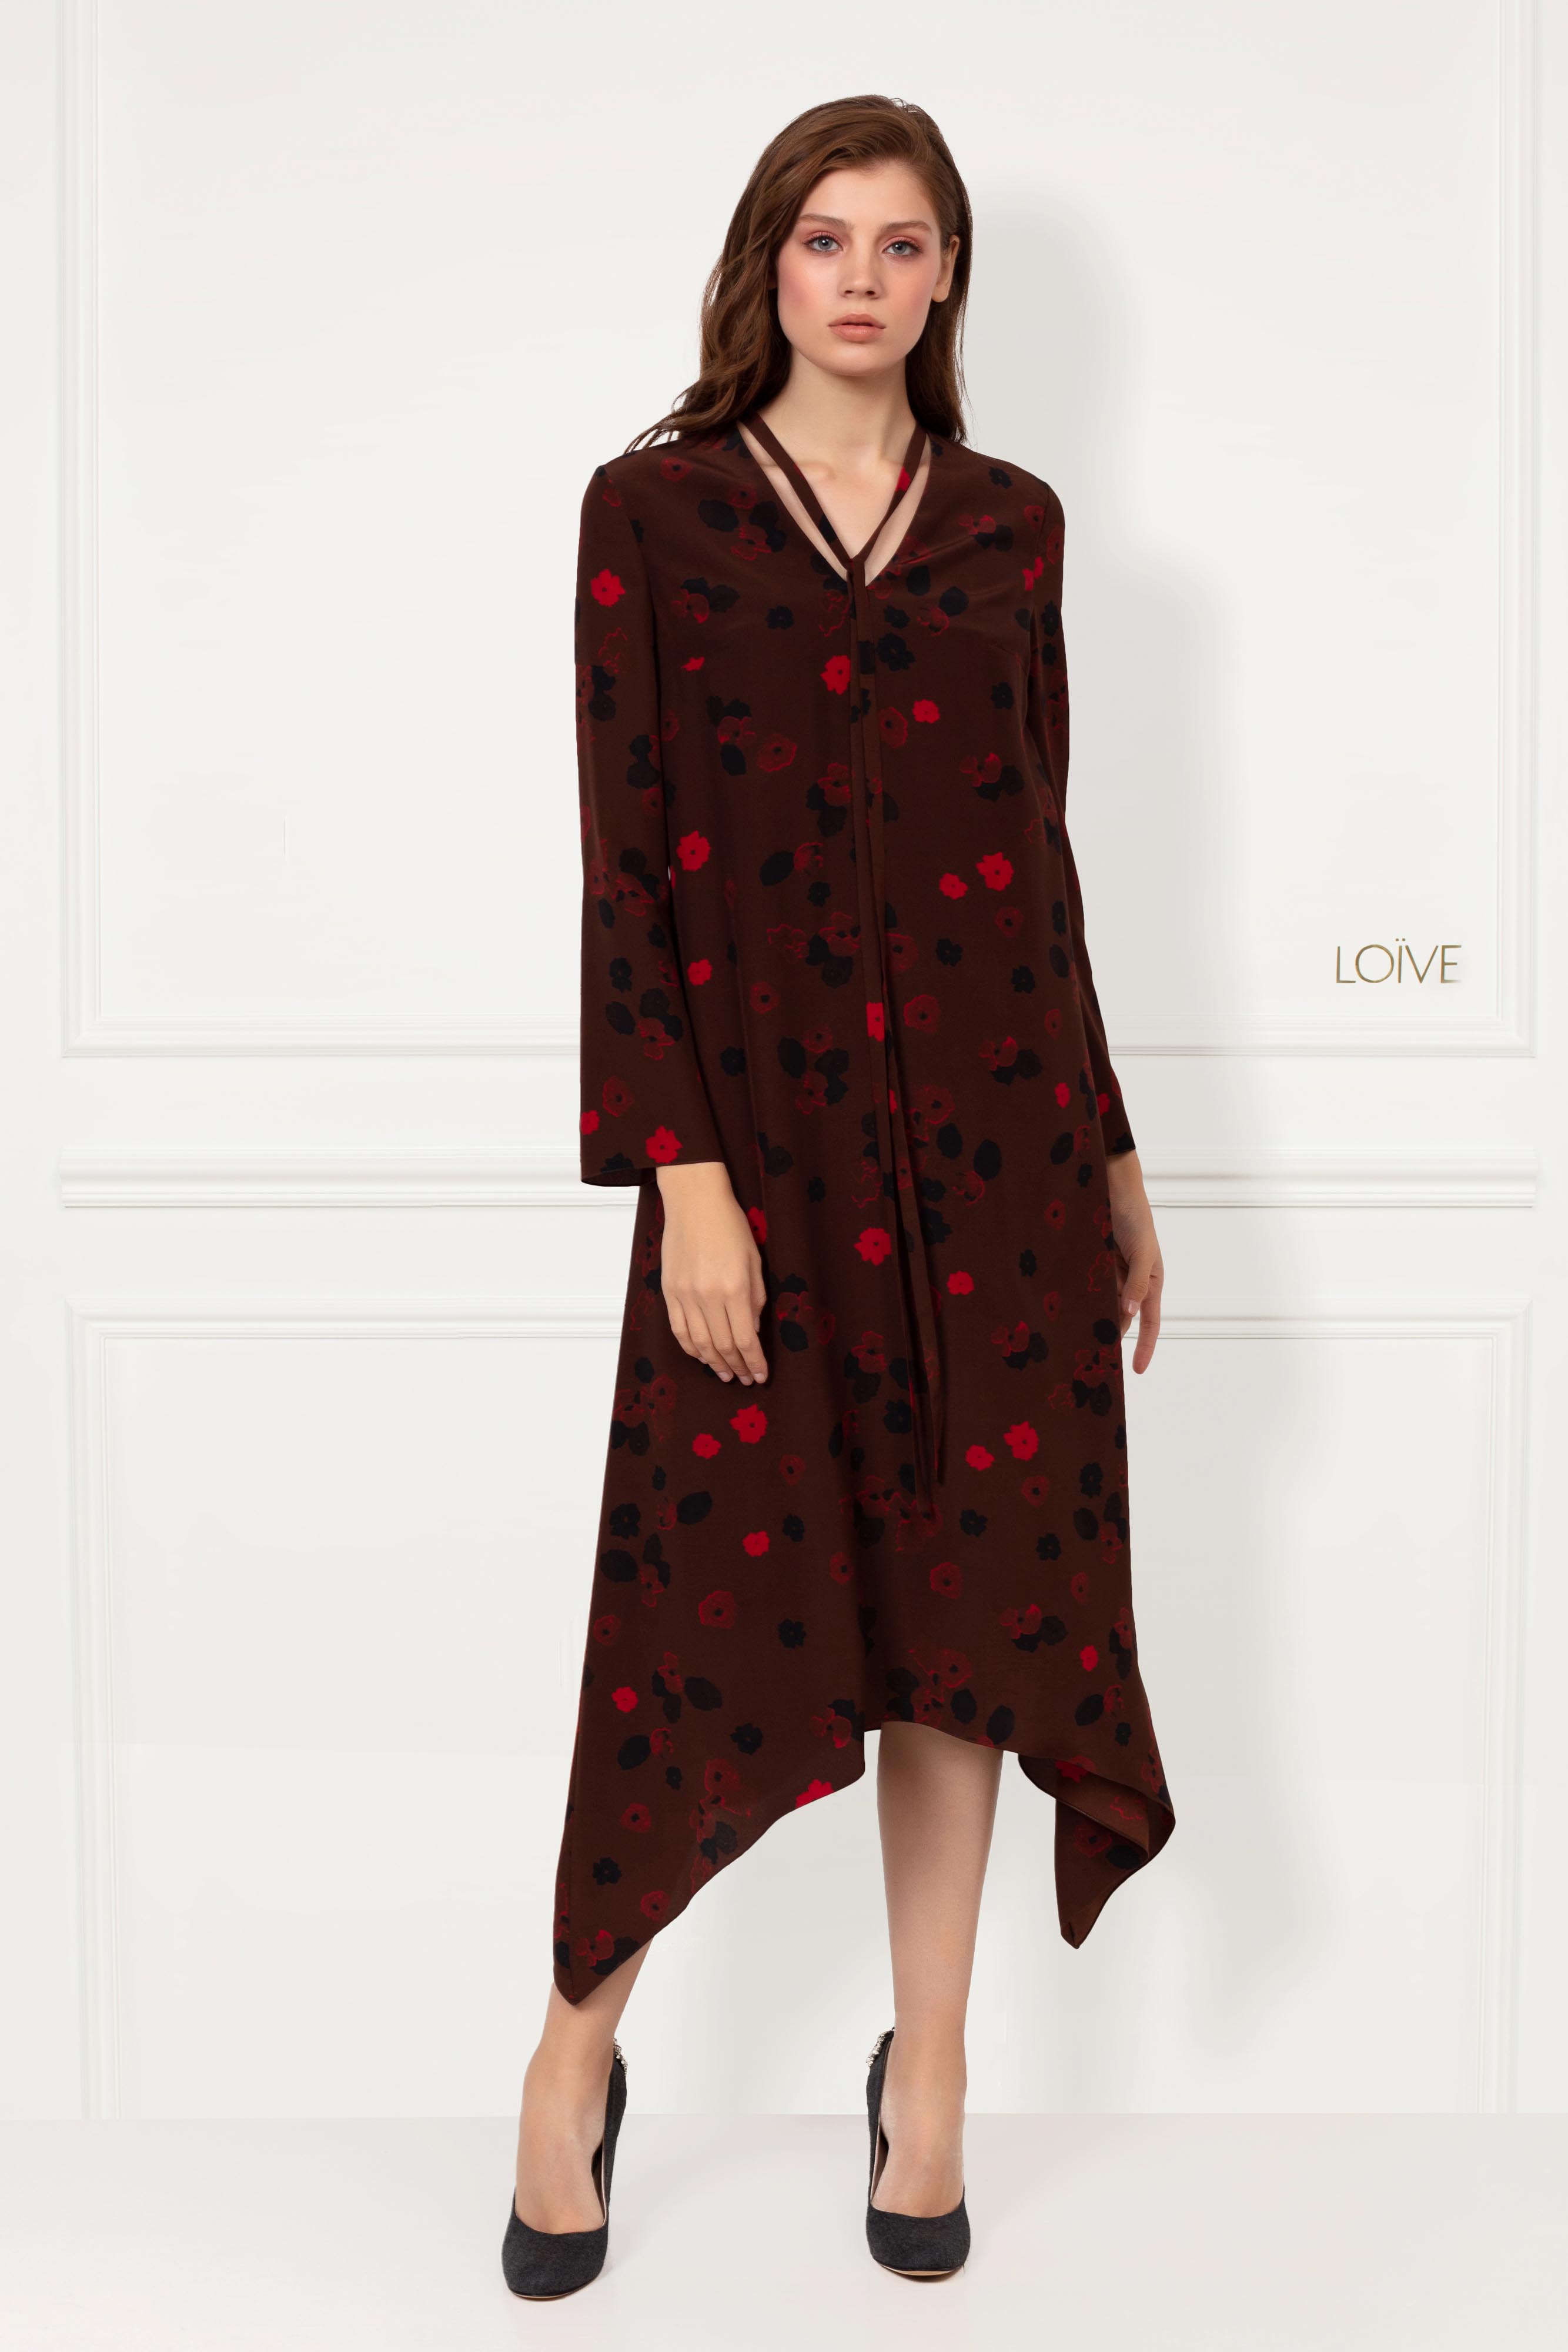 LILY AUTUMN LEAVES DRESS